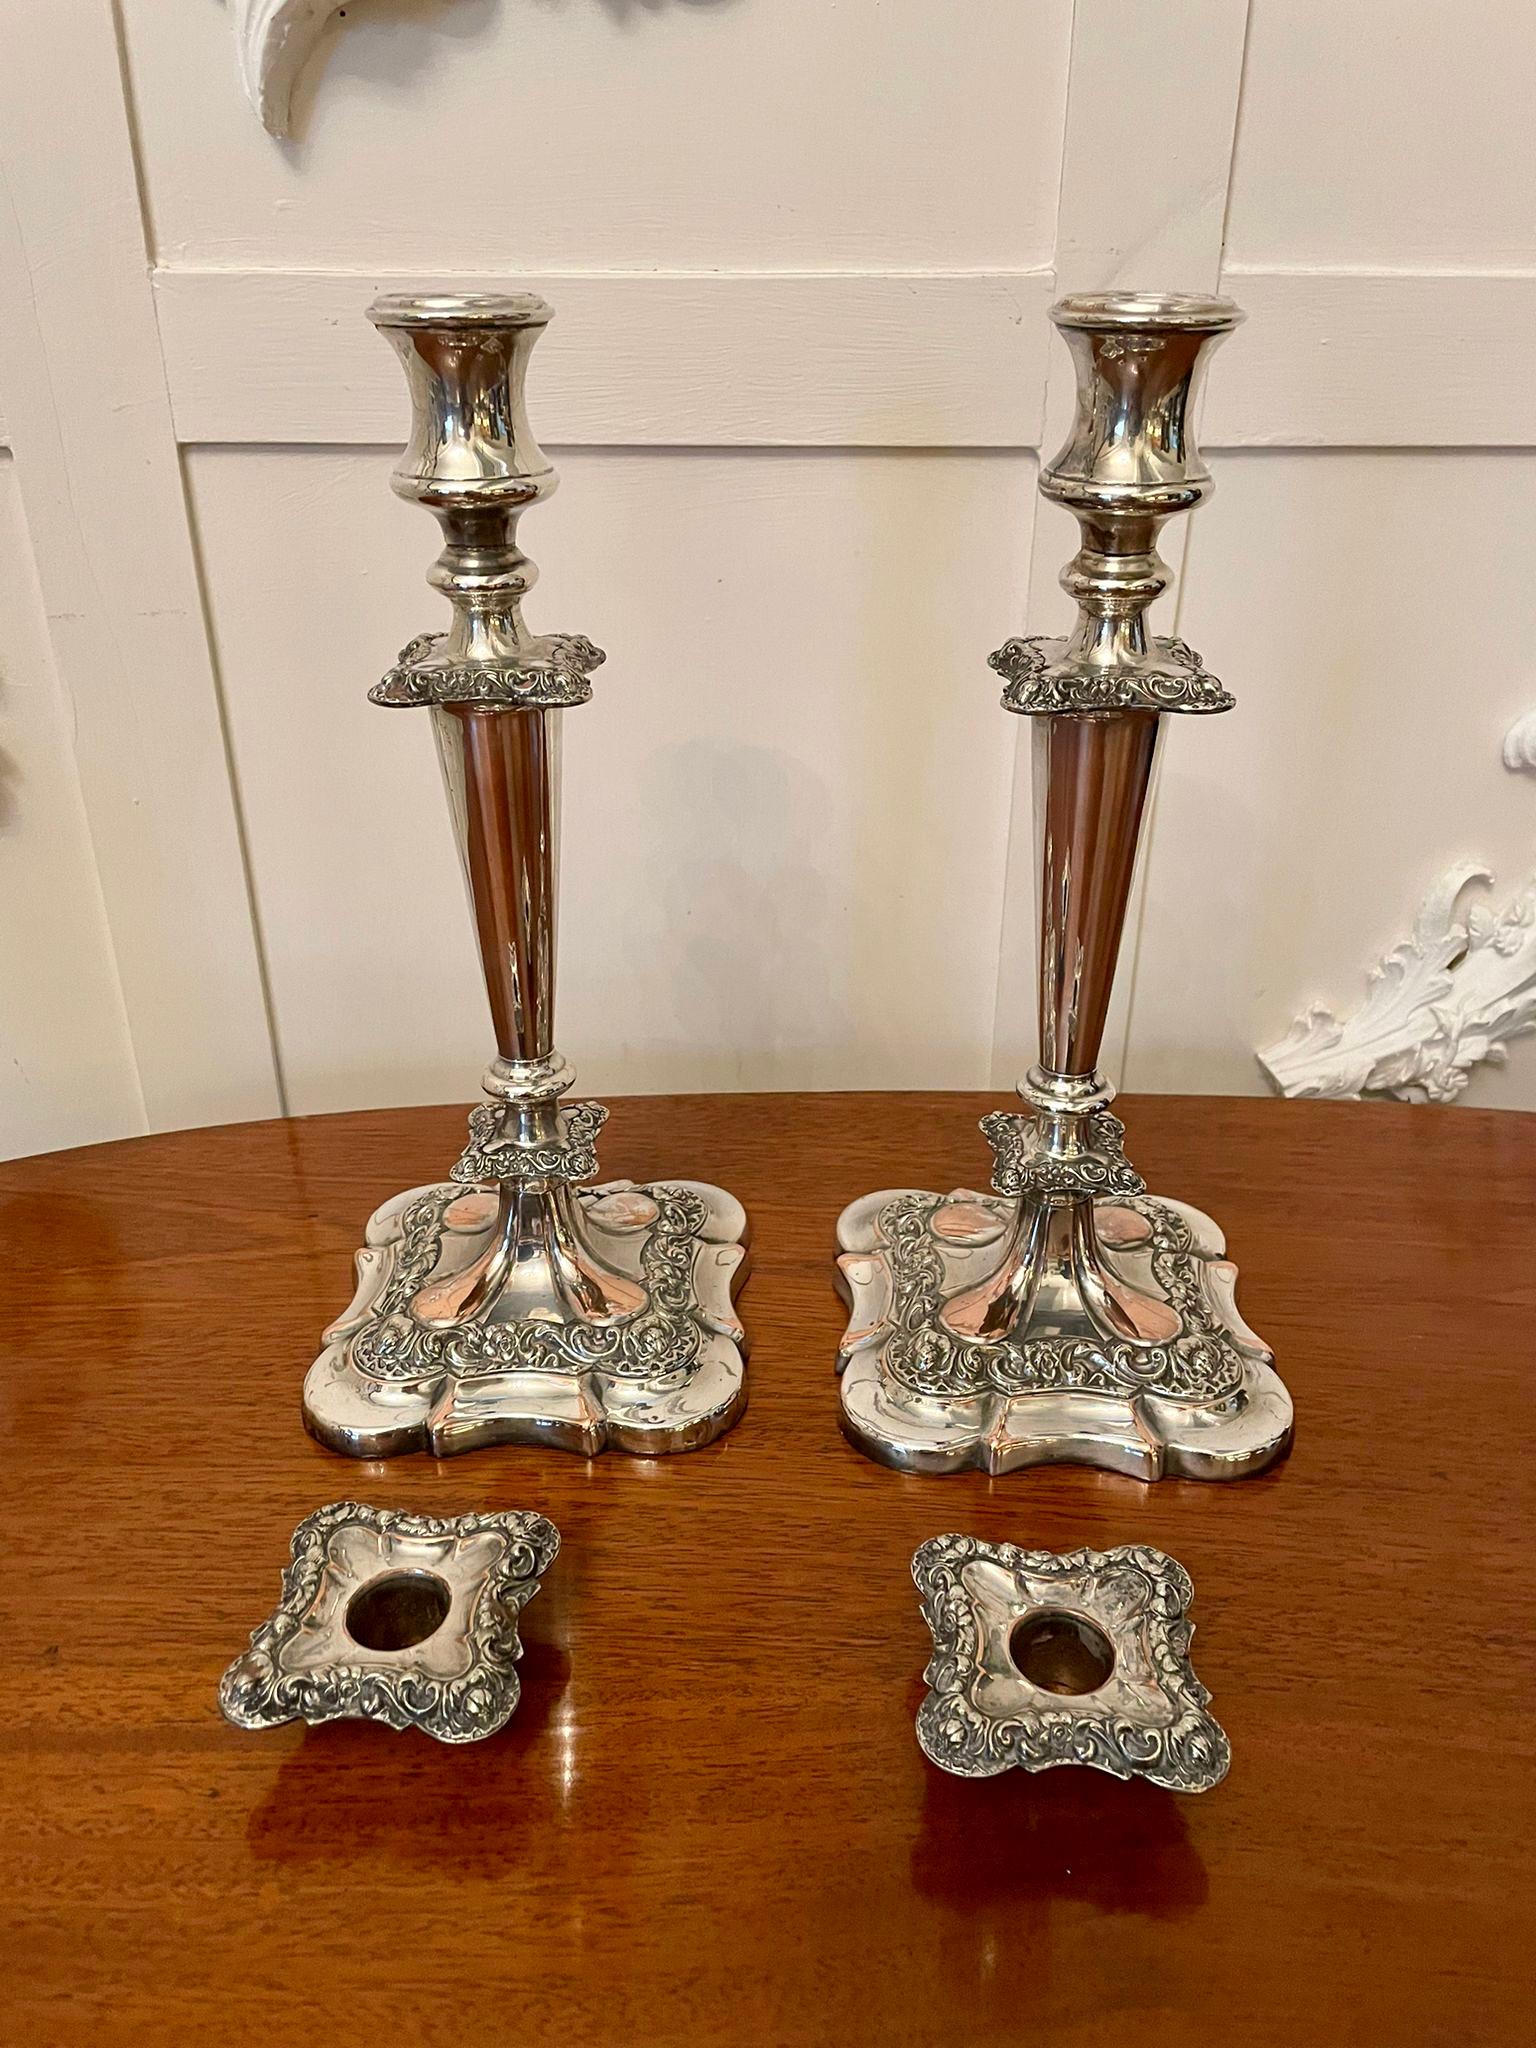 European Large Pair of Quality Antique Victorian Sheffield Plated Ornate Candlesticks For Sale